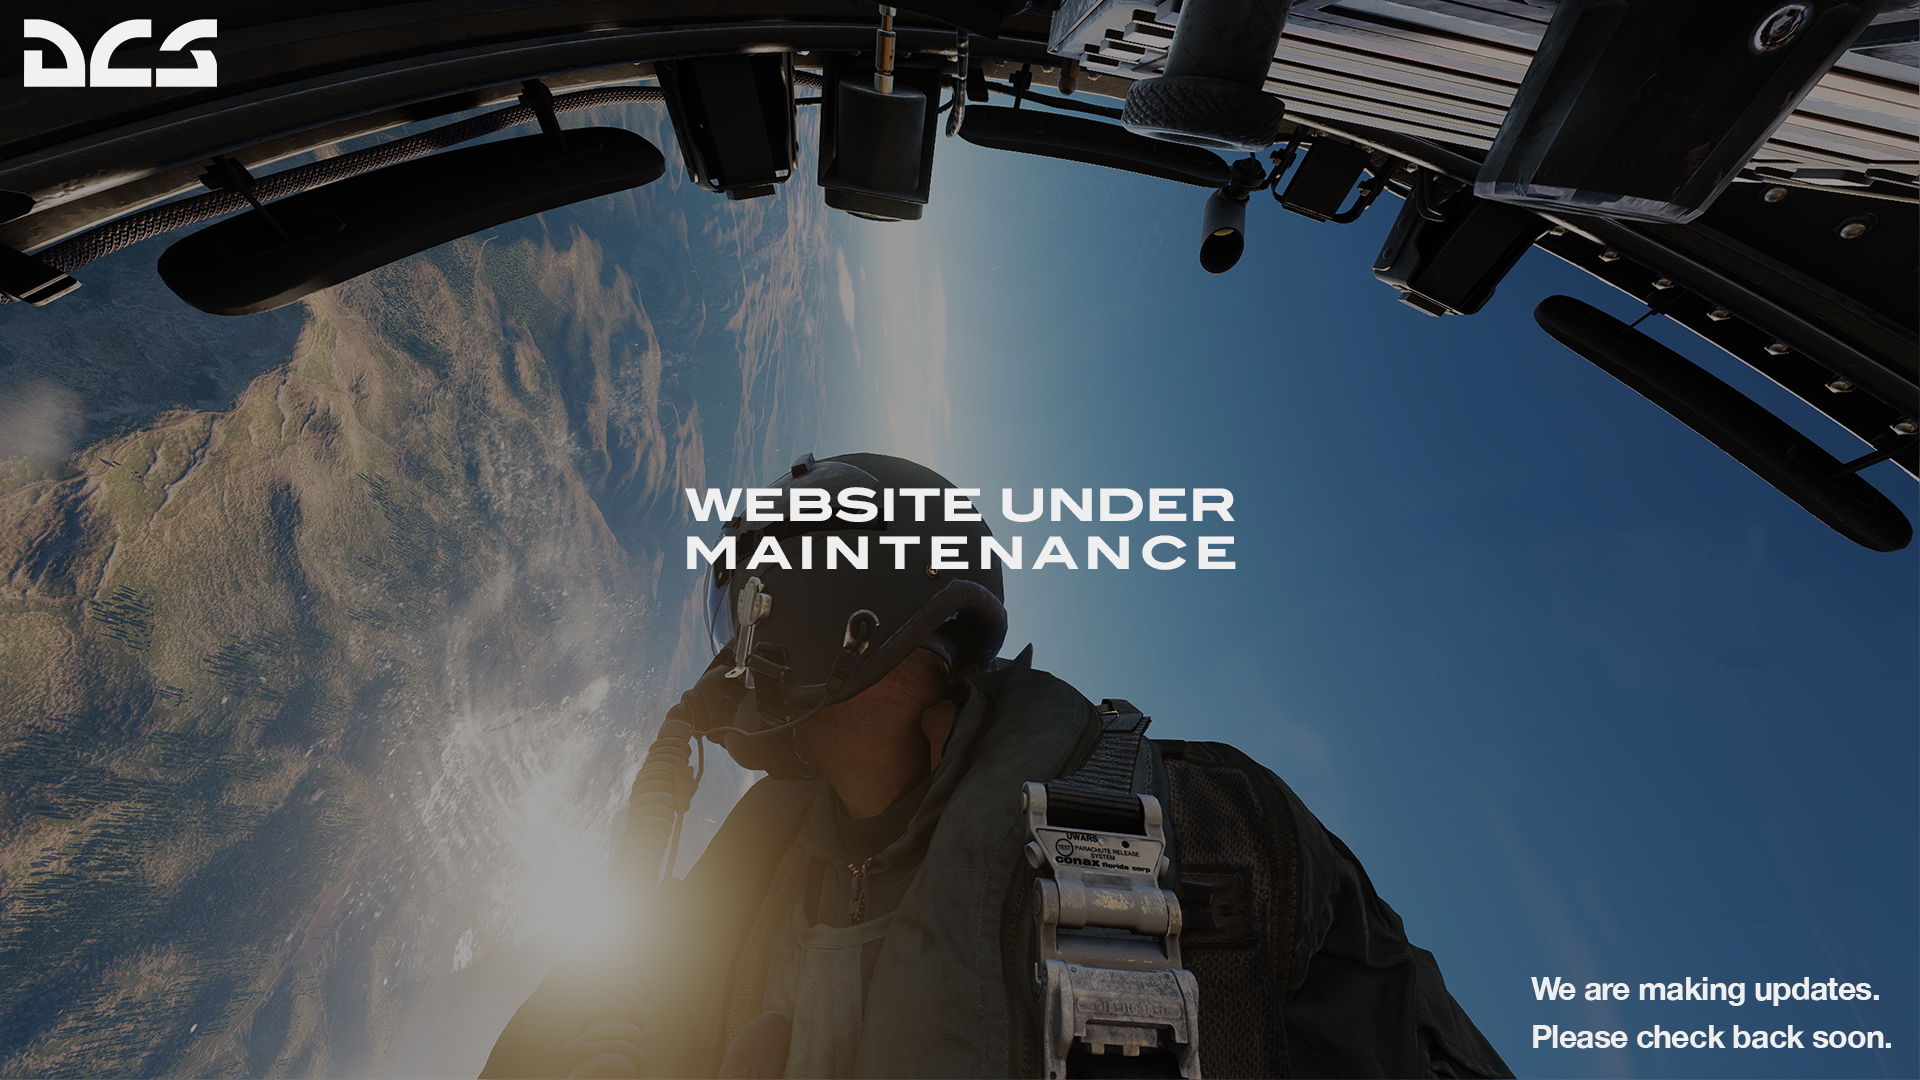 Website under maintenance. We are making updates. Please check back soon.